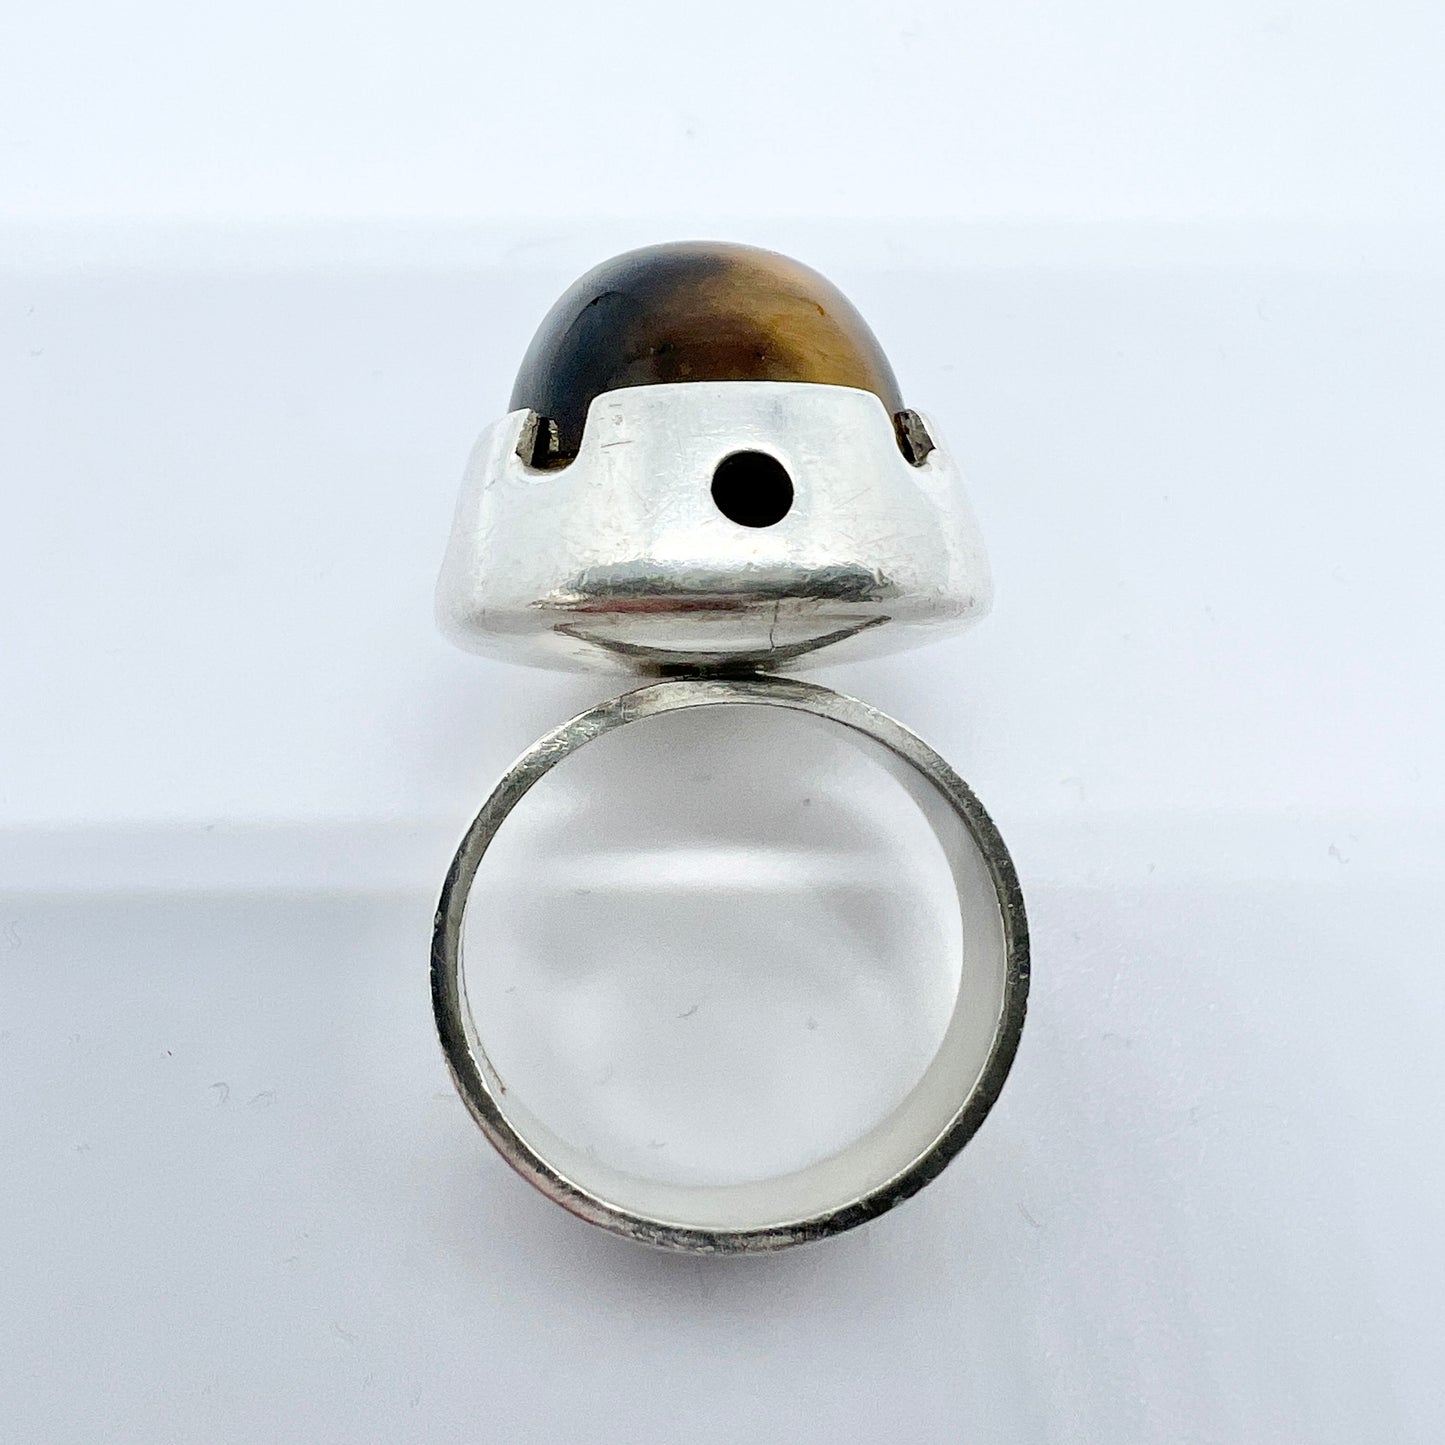 Finland 1960-70s. Solid Silver Tiger's Eye Ring.